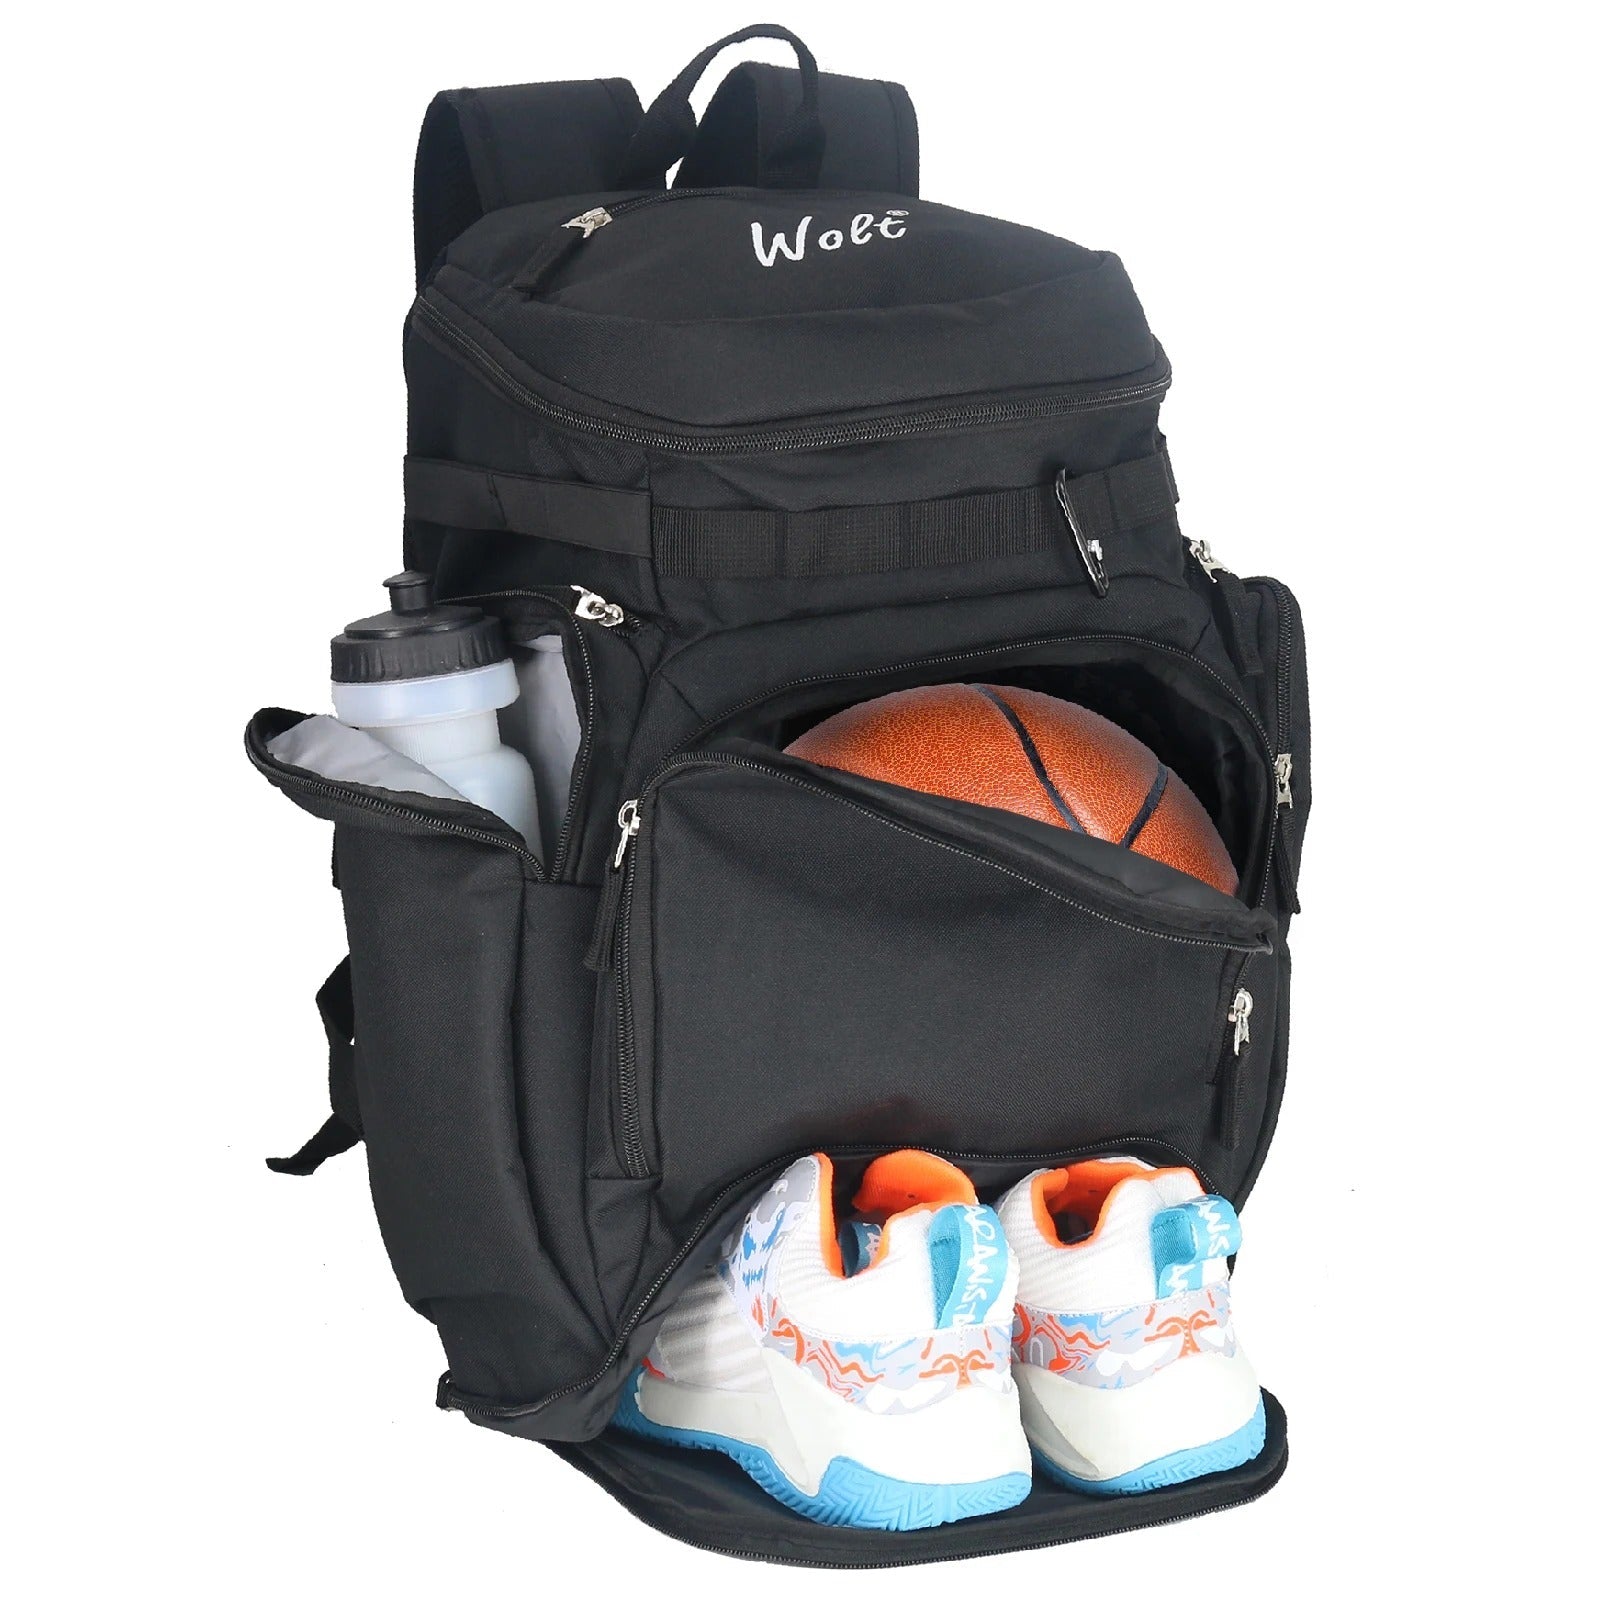 Basketball Pro Backpack - Black / 18 inches